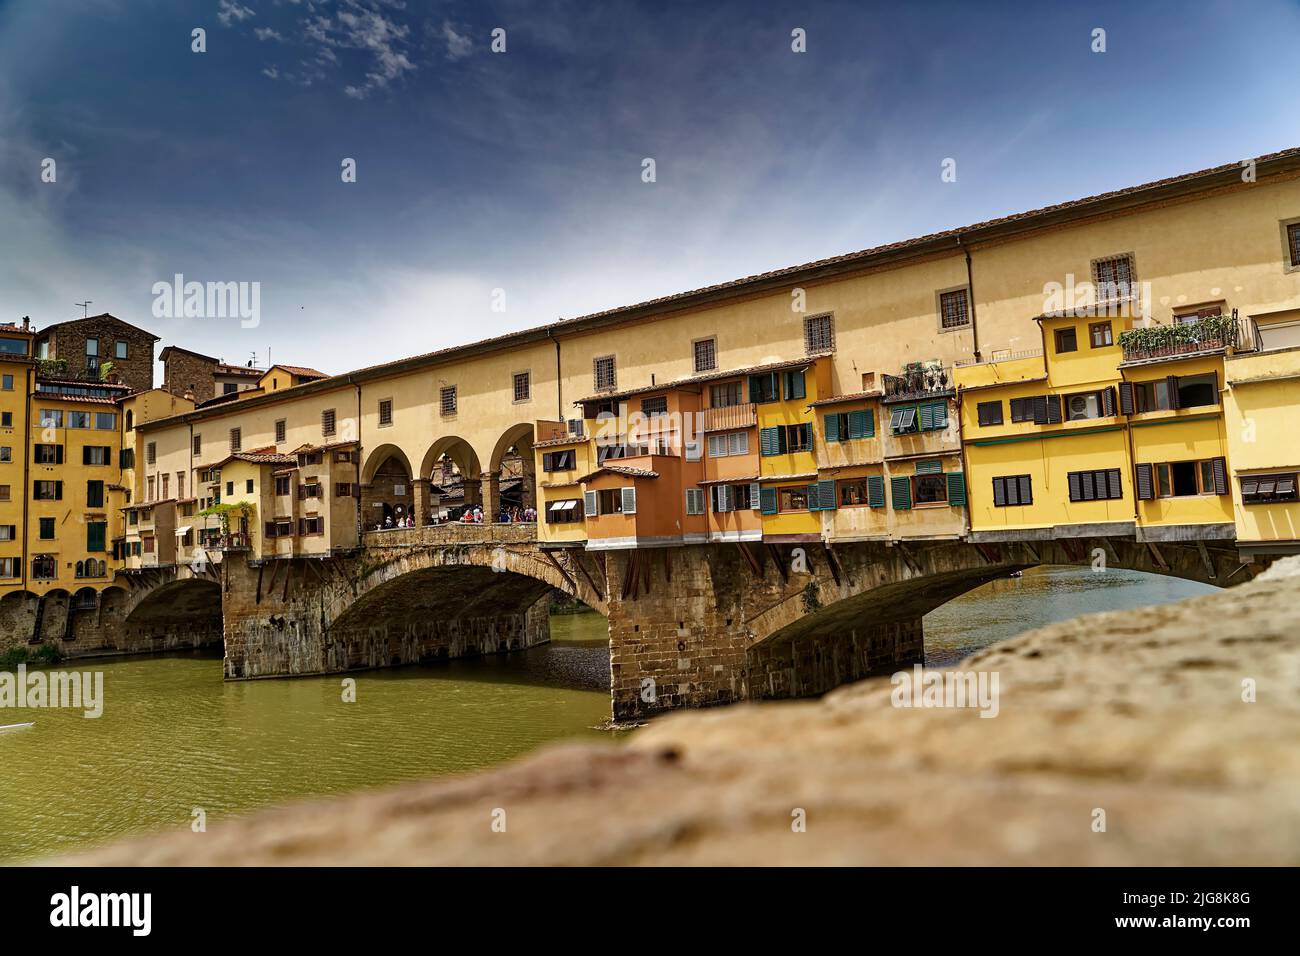 A beautiful view of Ponte Vecchio closed-spandrel arch bridge in Florence, Italy Stock Photo